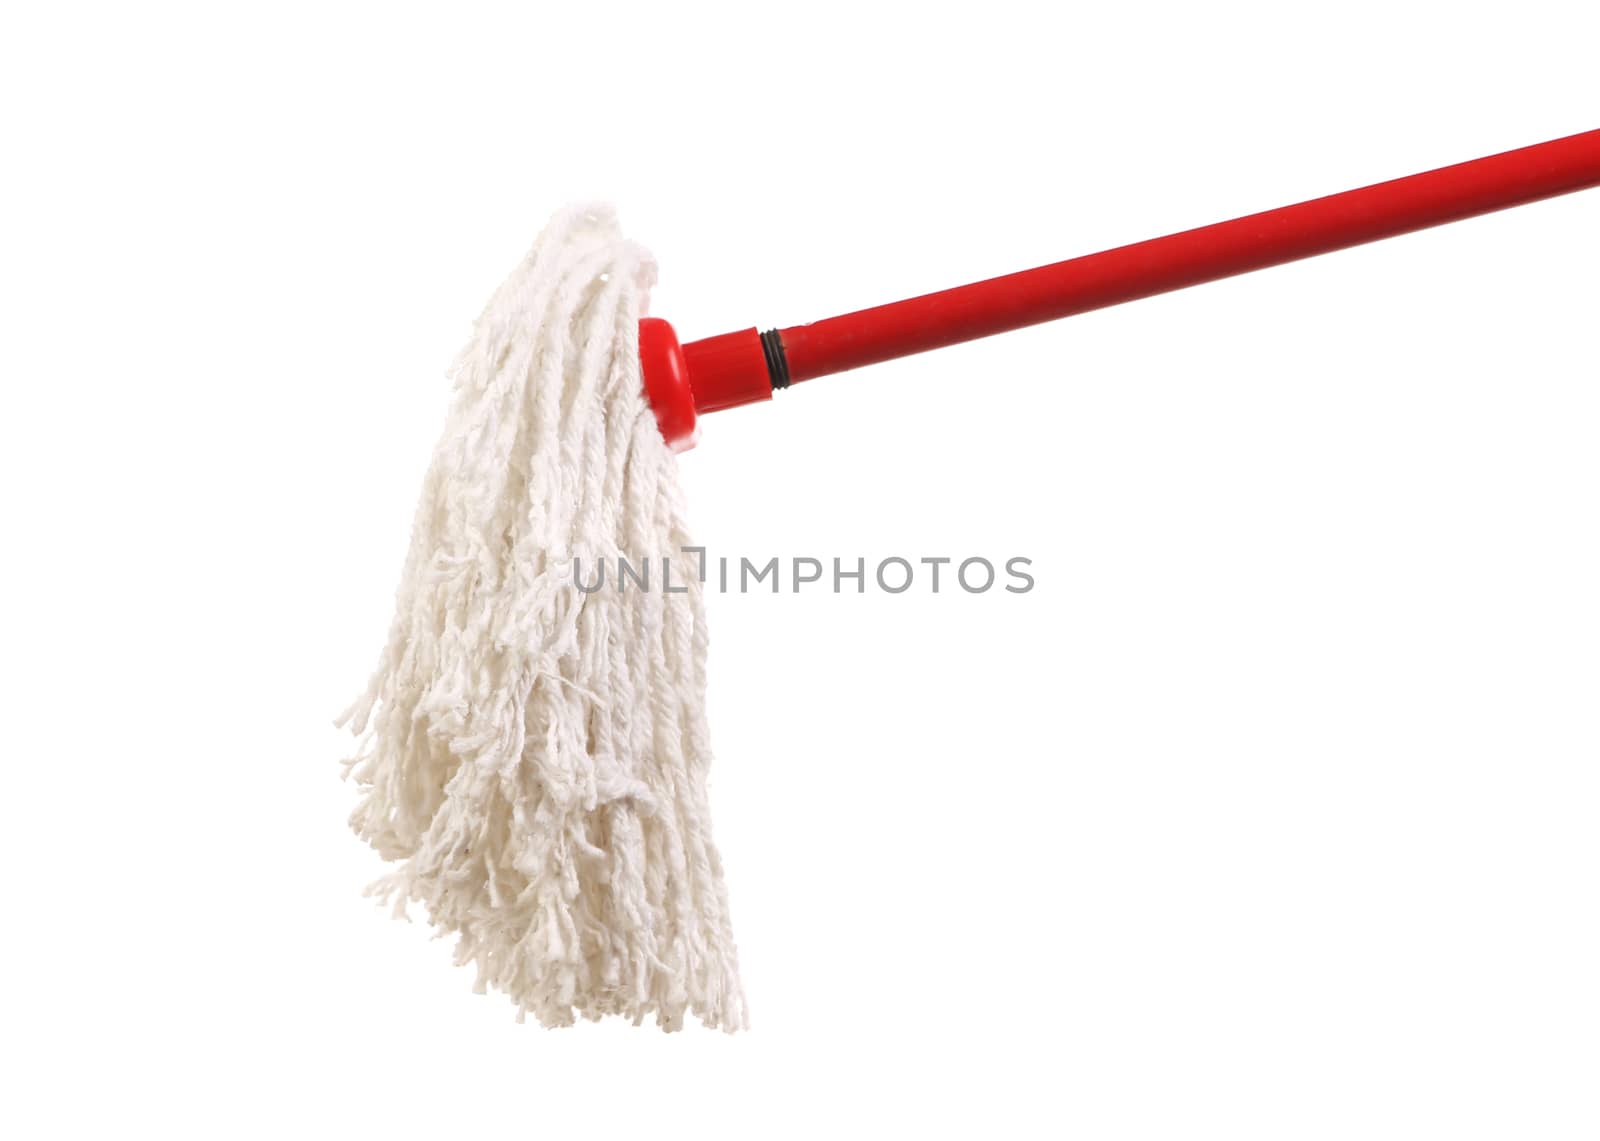 Closeup of red mop for cleaning. Isolated on a white background.